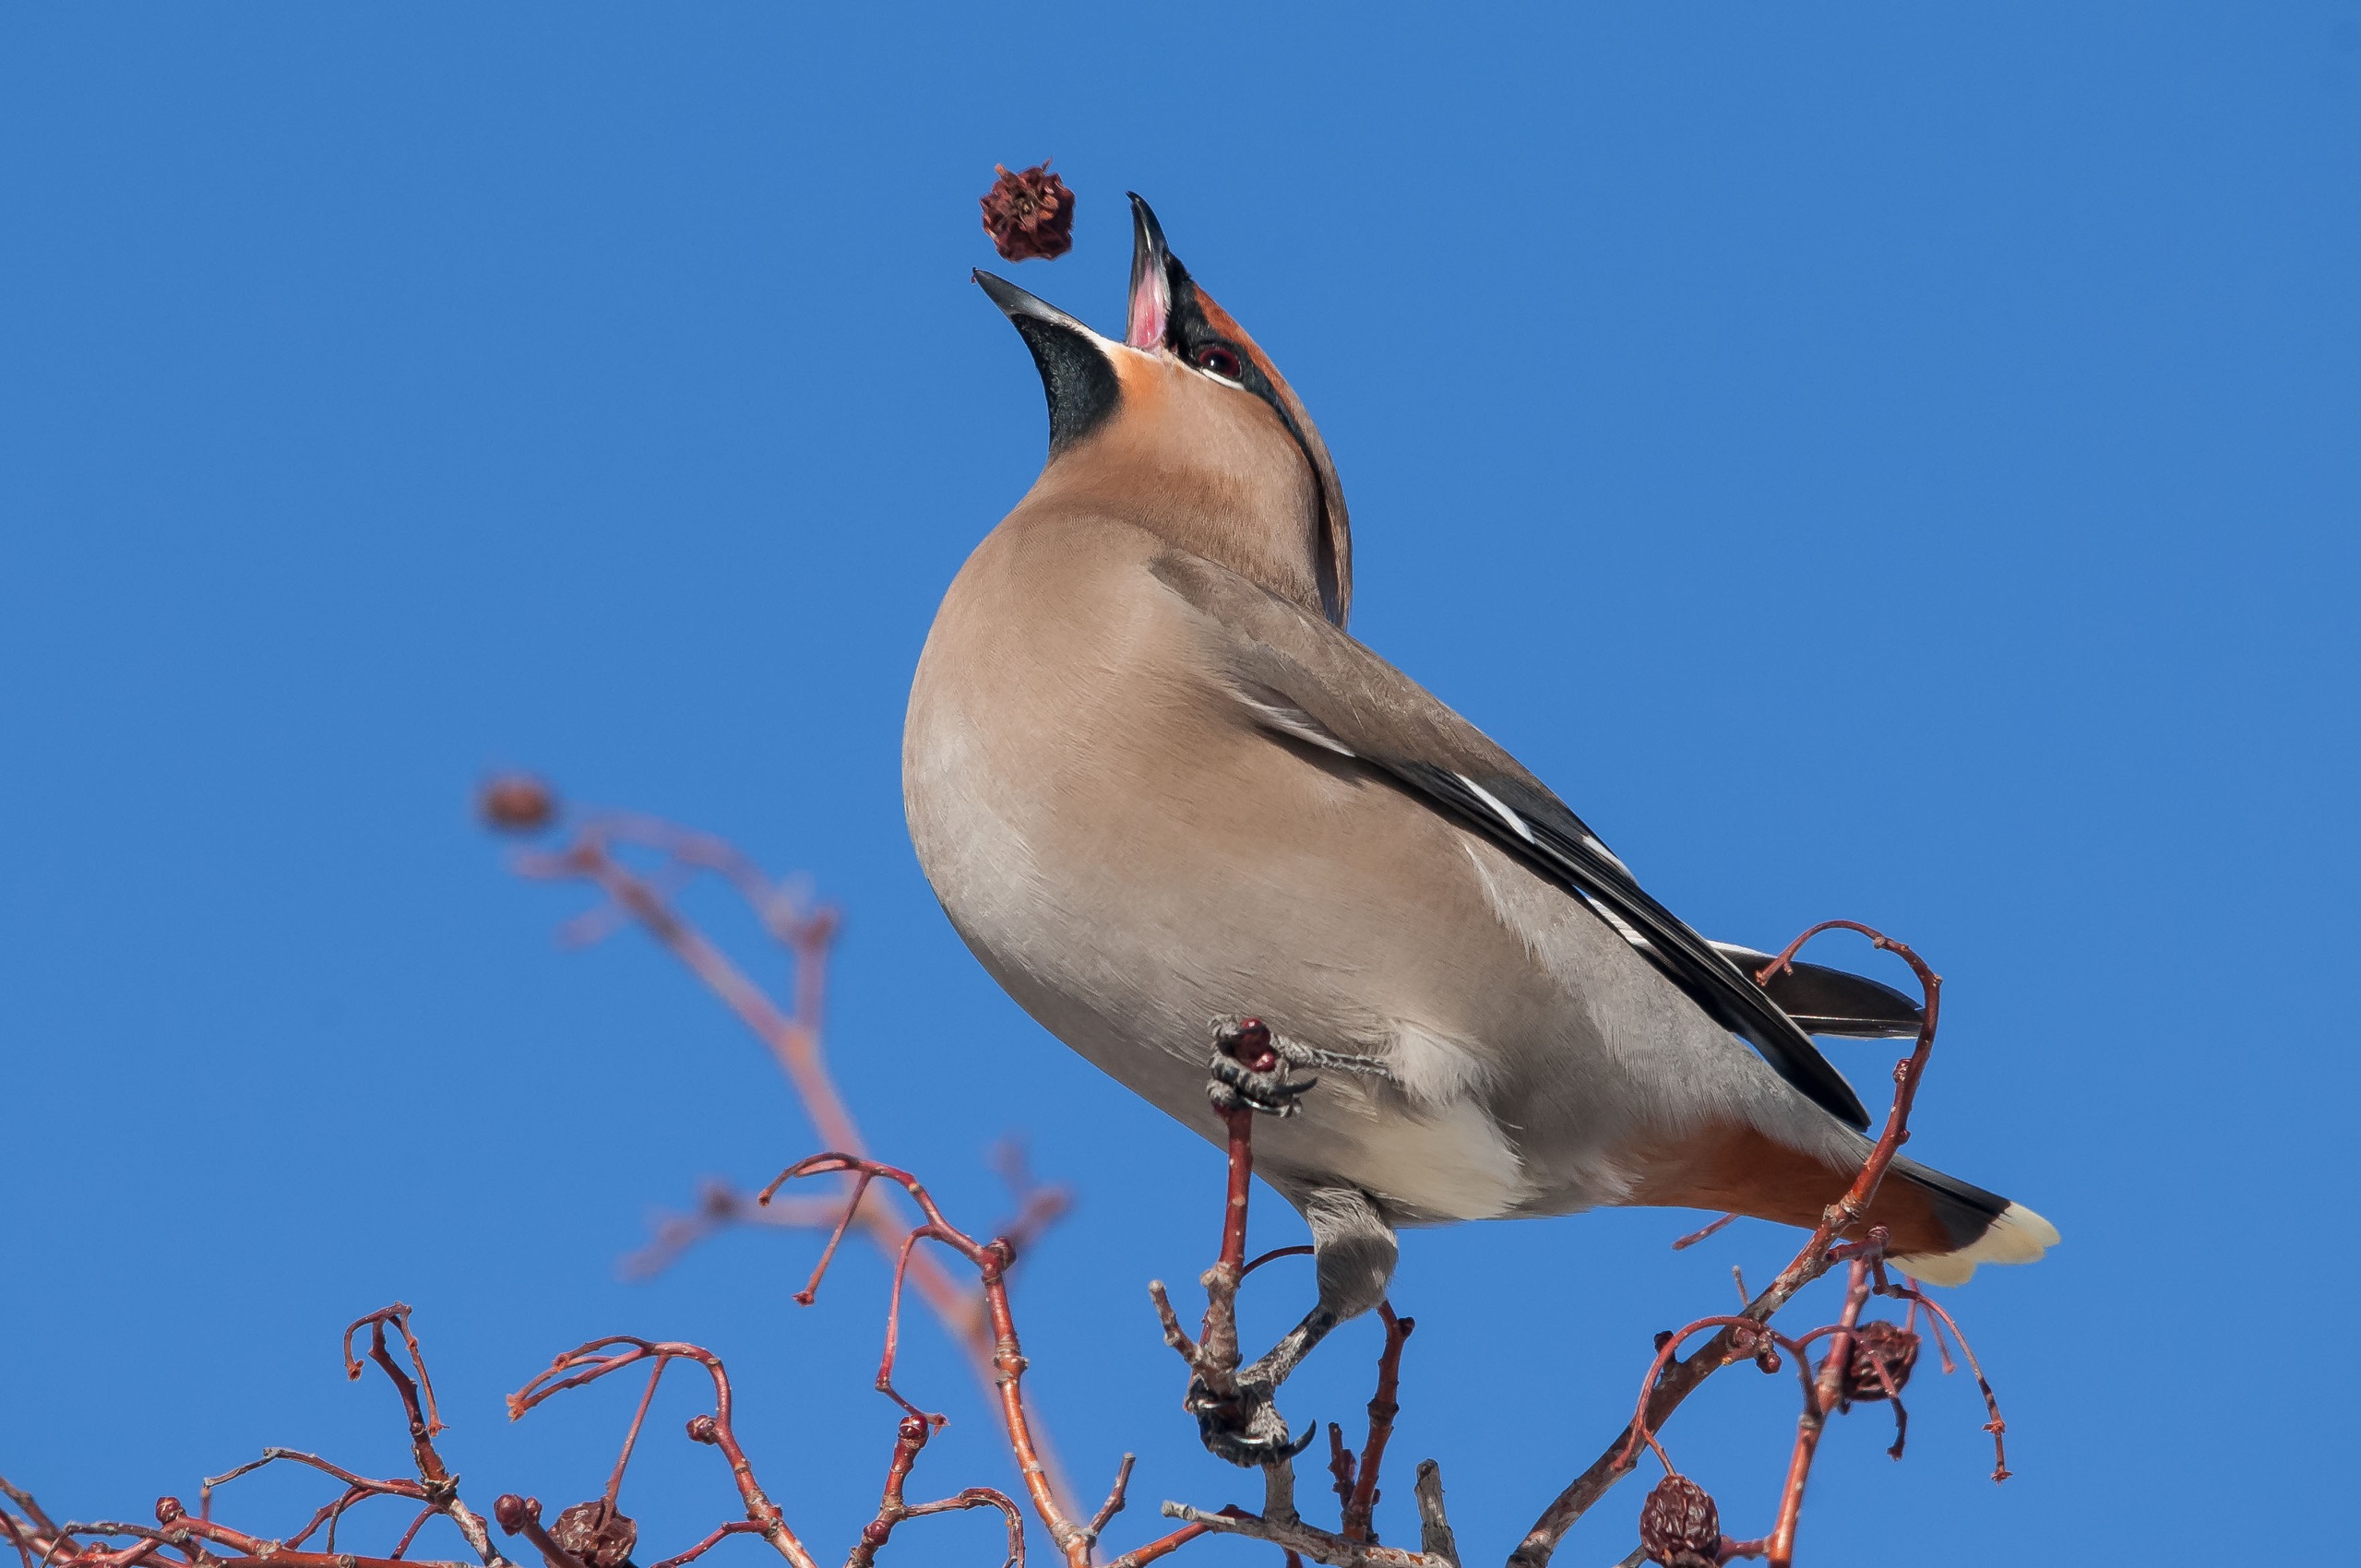 Bohemian waxwings are infamous for flying into windows after eating fermented berries. LEO DE GROOT